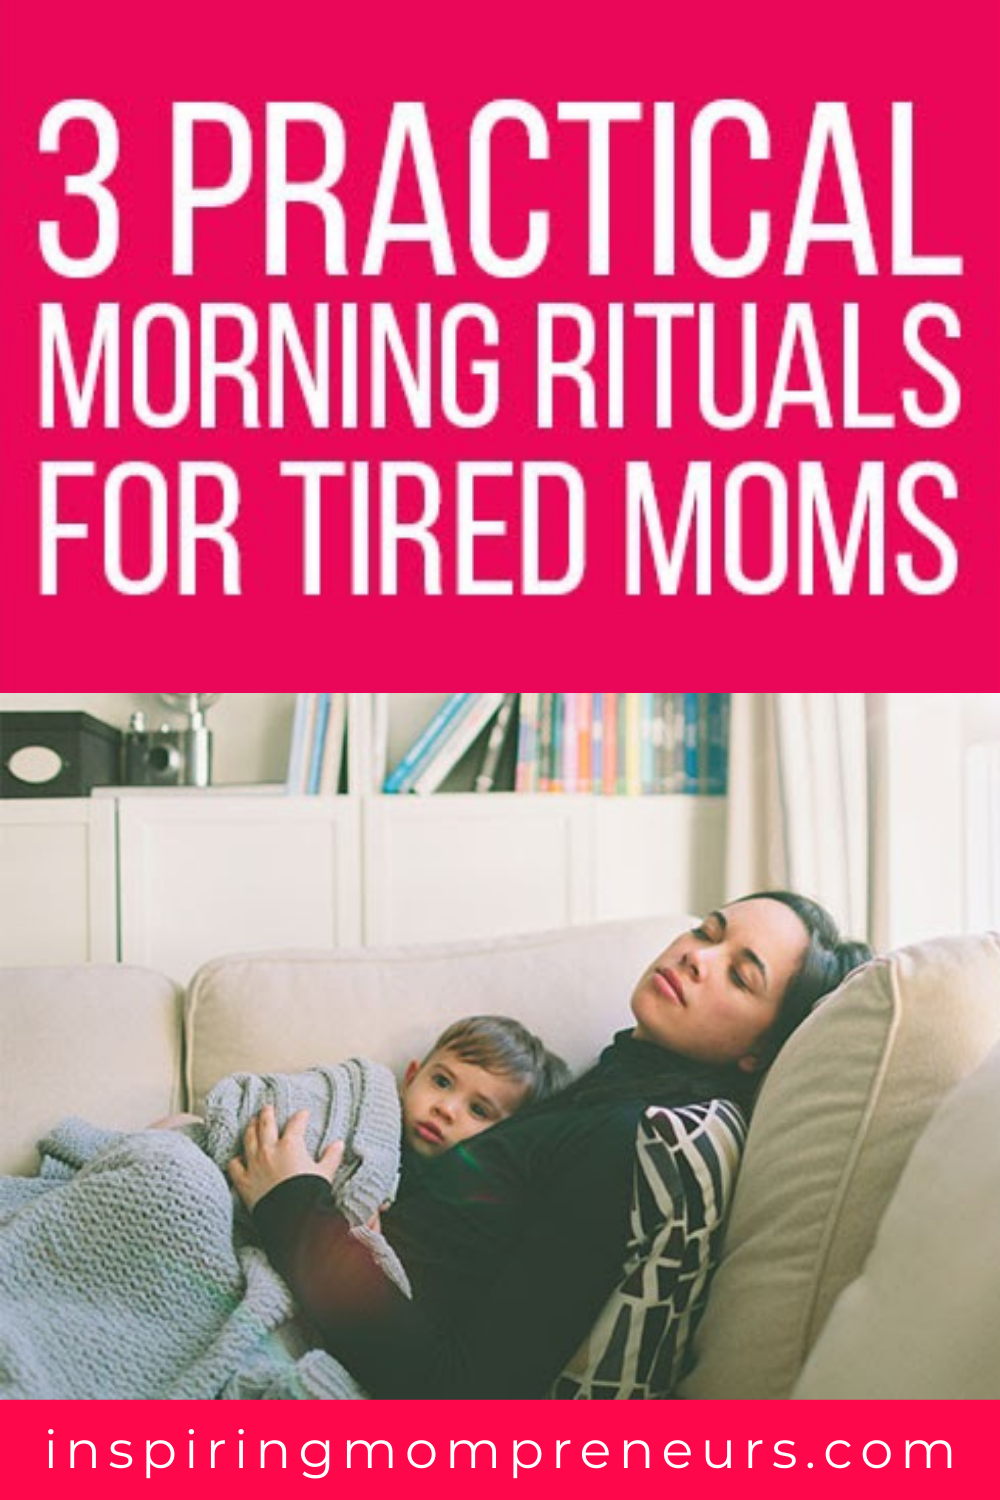 Here are 3 practical morning rituals to take you from tired mom to super mom in just 30 minutes, care of The 4am Club.  #practical #morningrituals #tiredmoms #worklifebalance #productivity